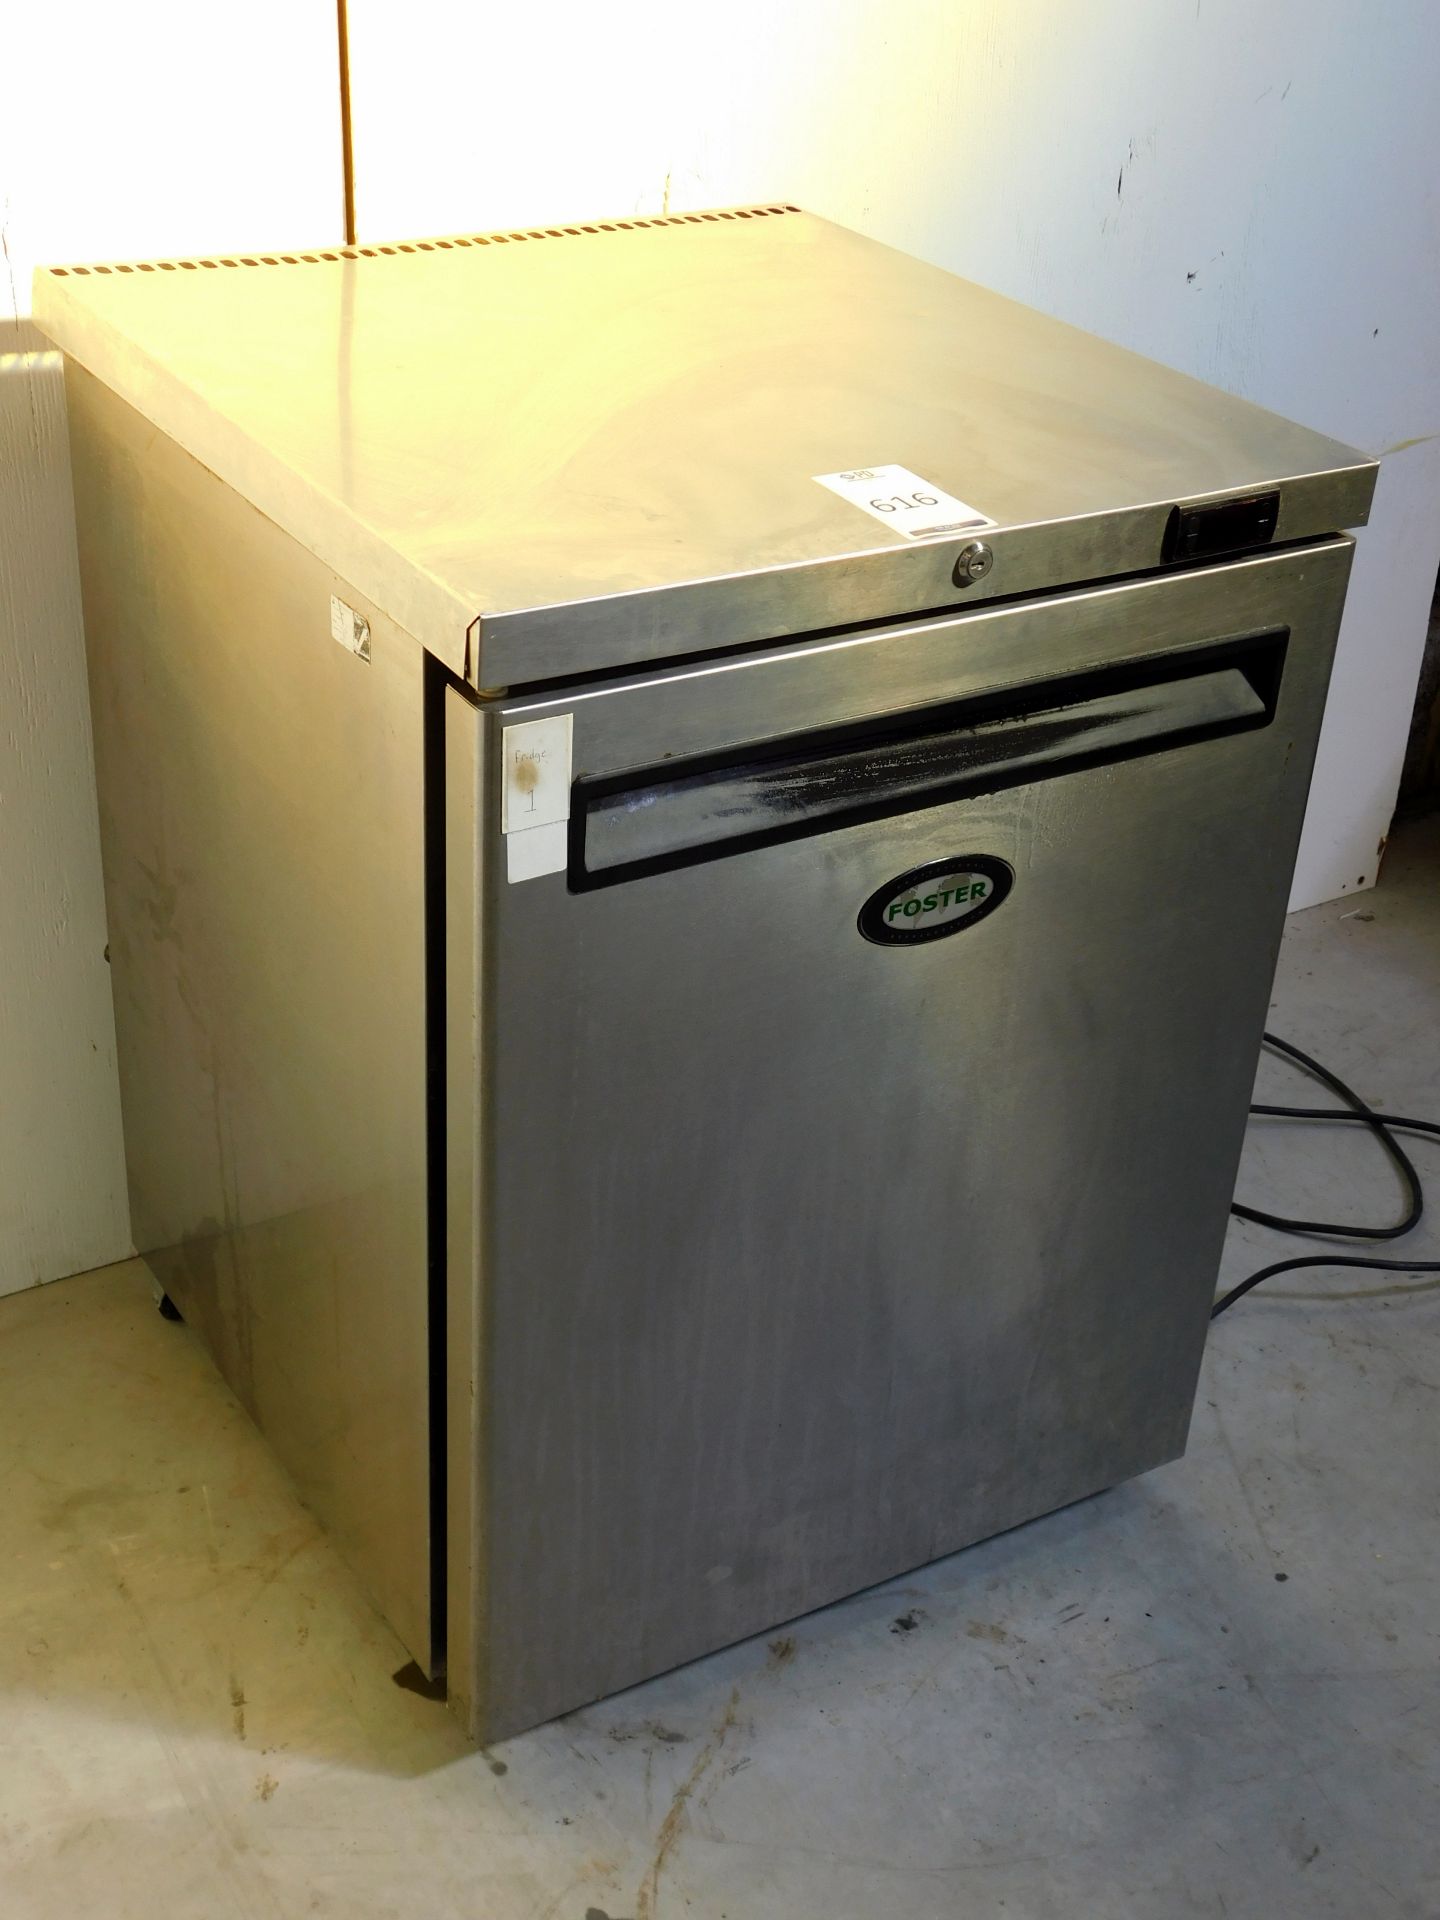 Foster HR150 Stainless Steel Single Door Undercounter Refrigerator, S/N: E5278477 (Located